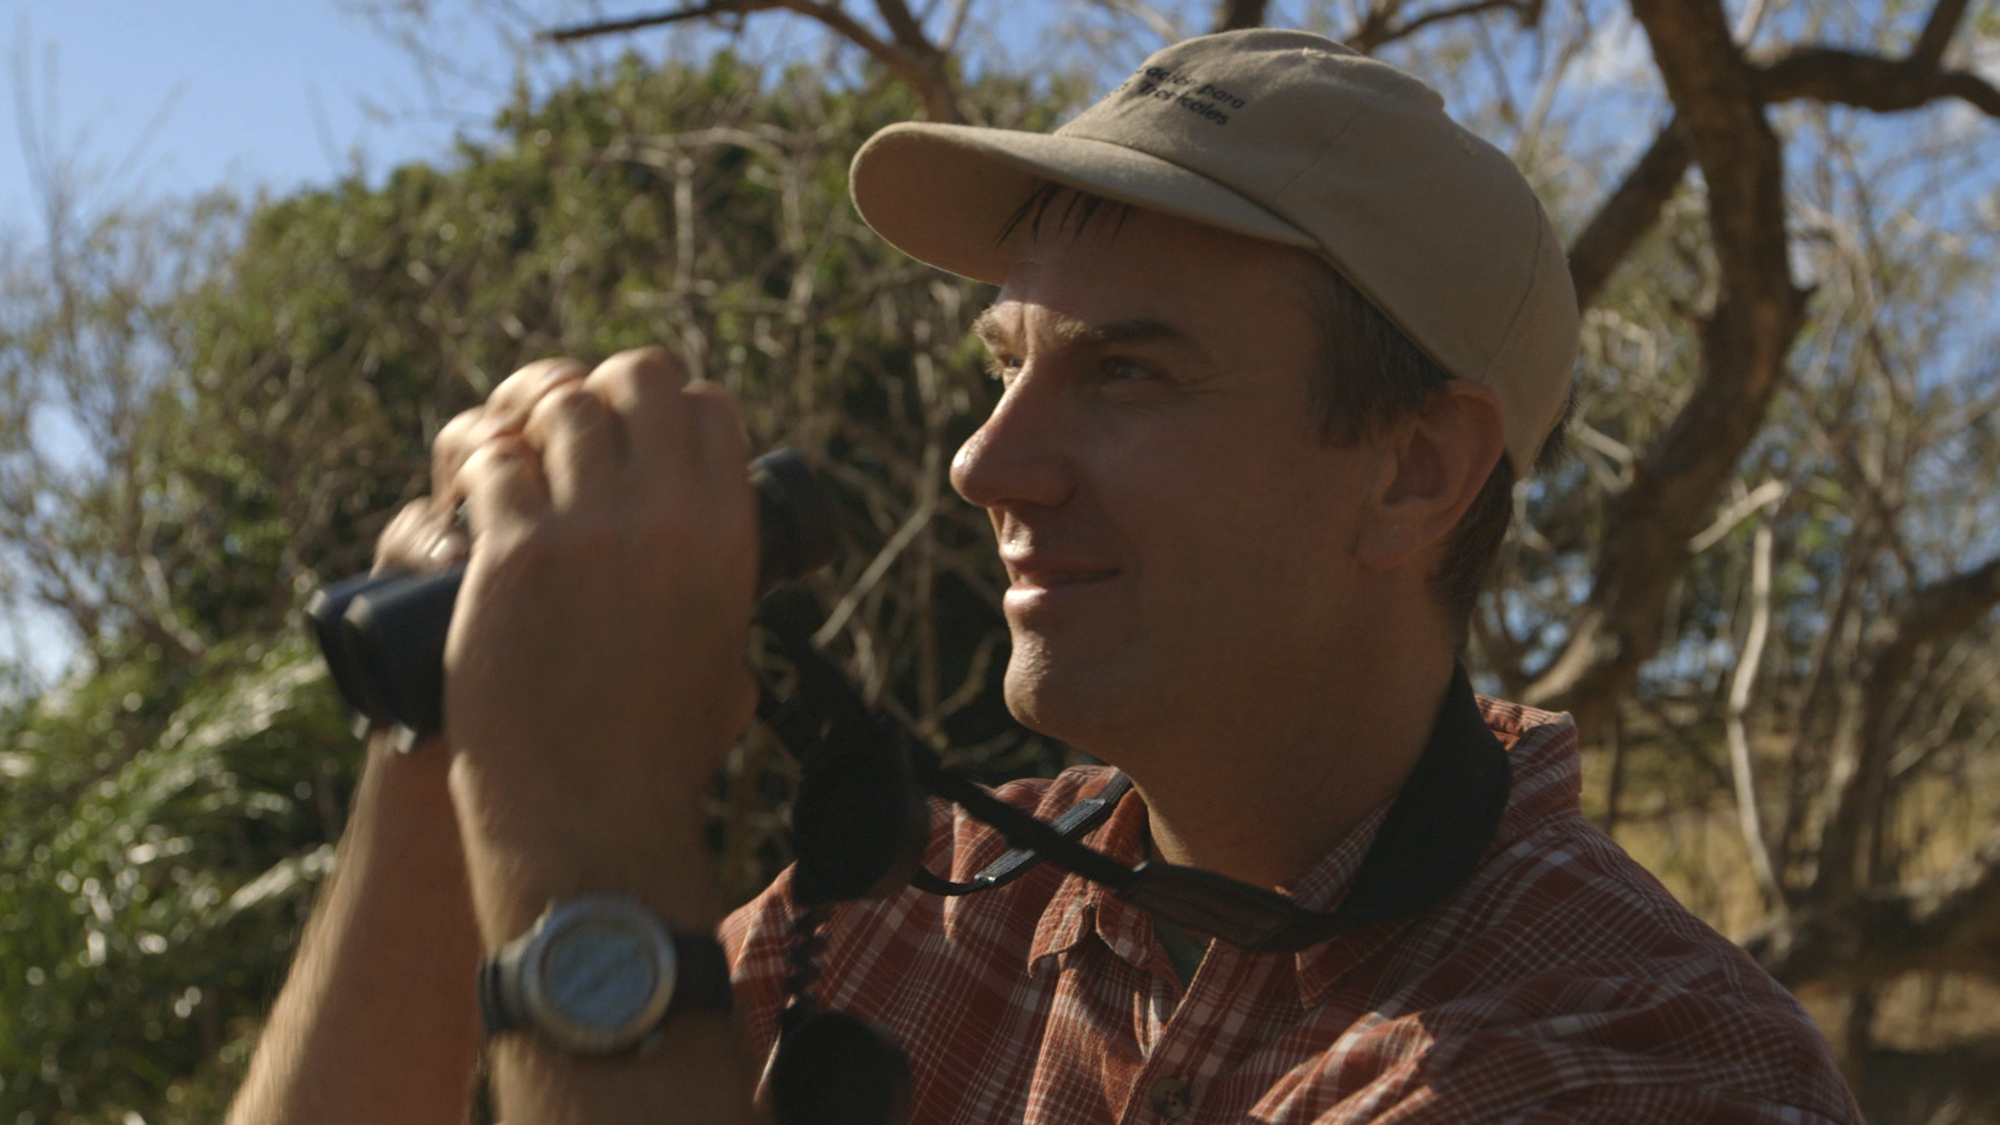 Tim Wright searches for parrots